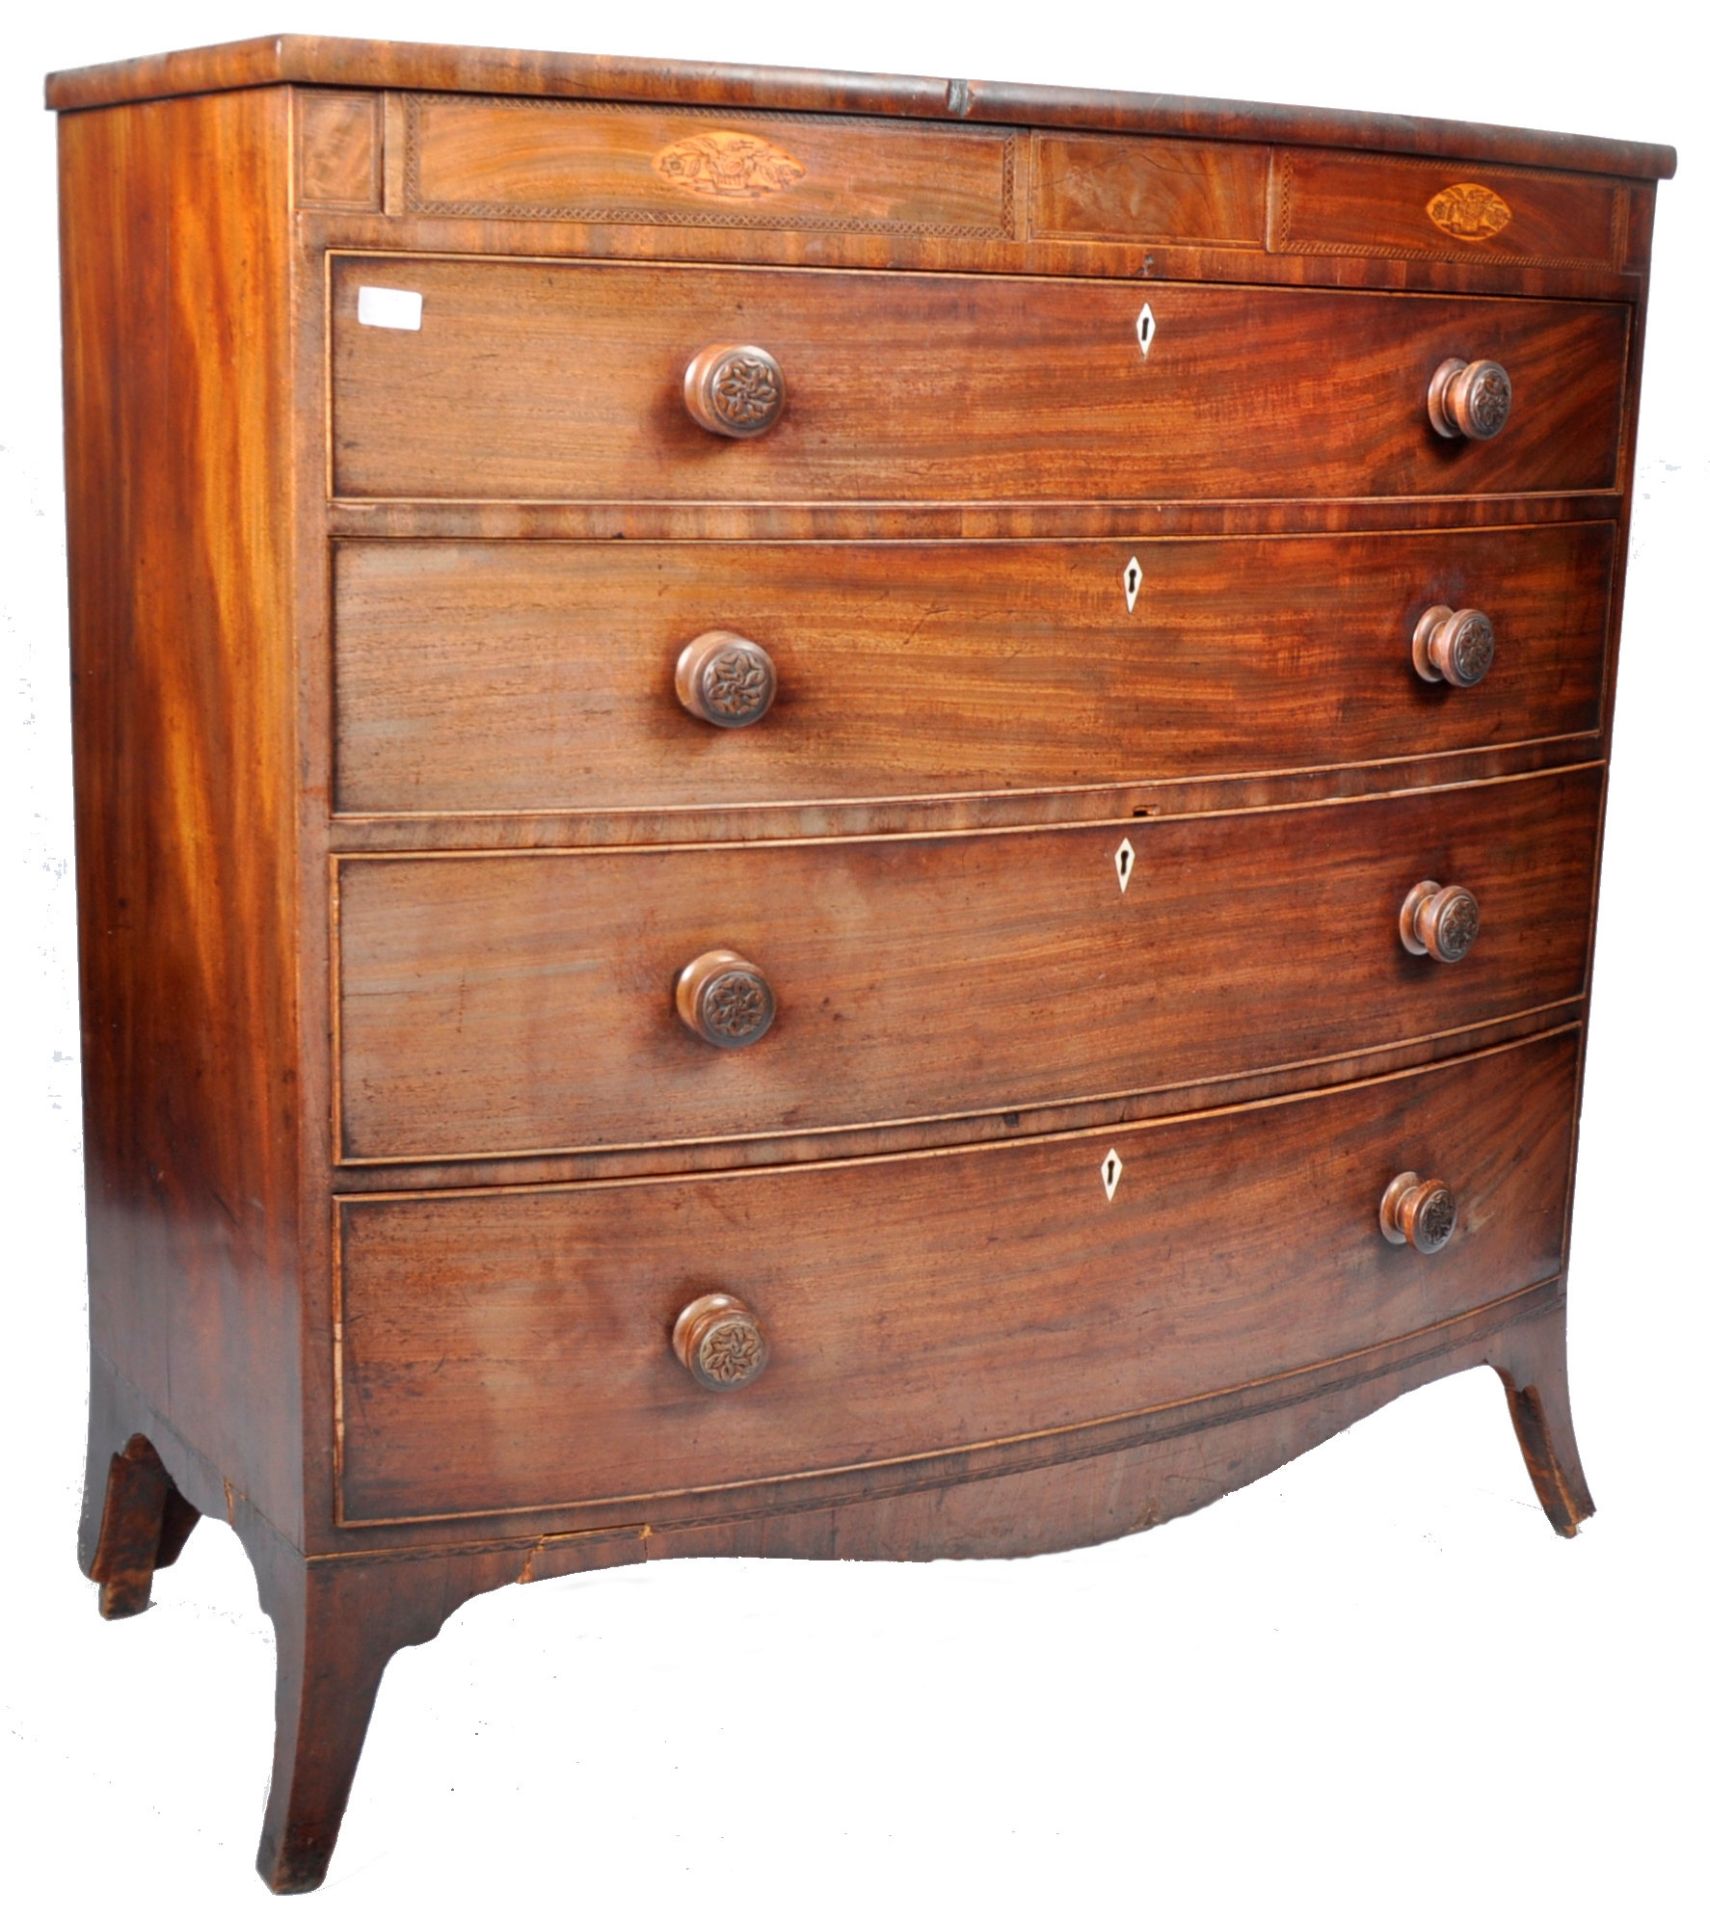 ANTIQUE 19TH CENTURY MAHOGANY BOW FRONT CHEST OF DRAWERS